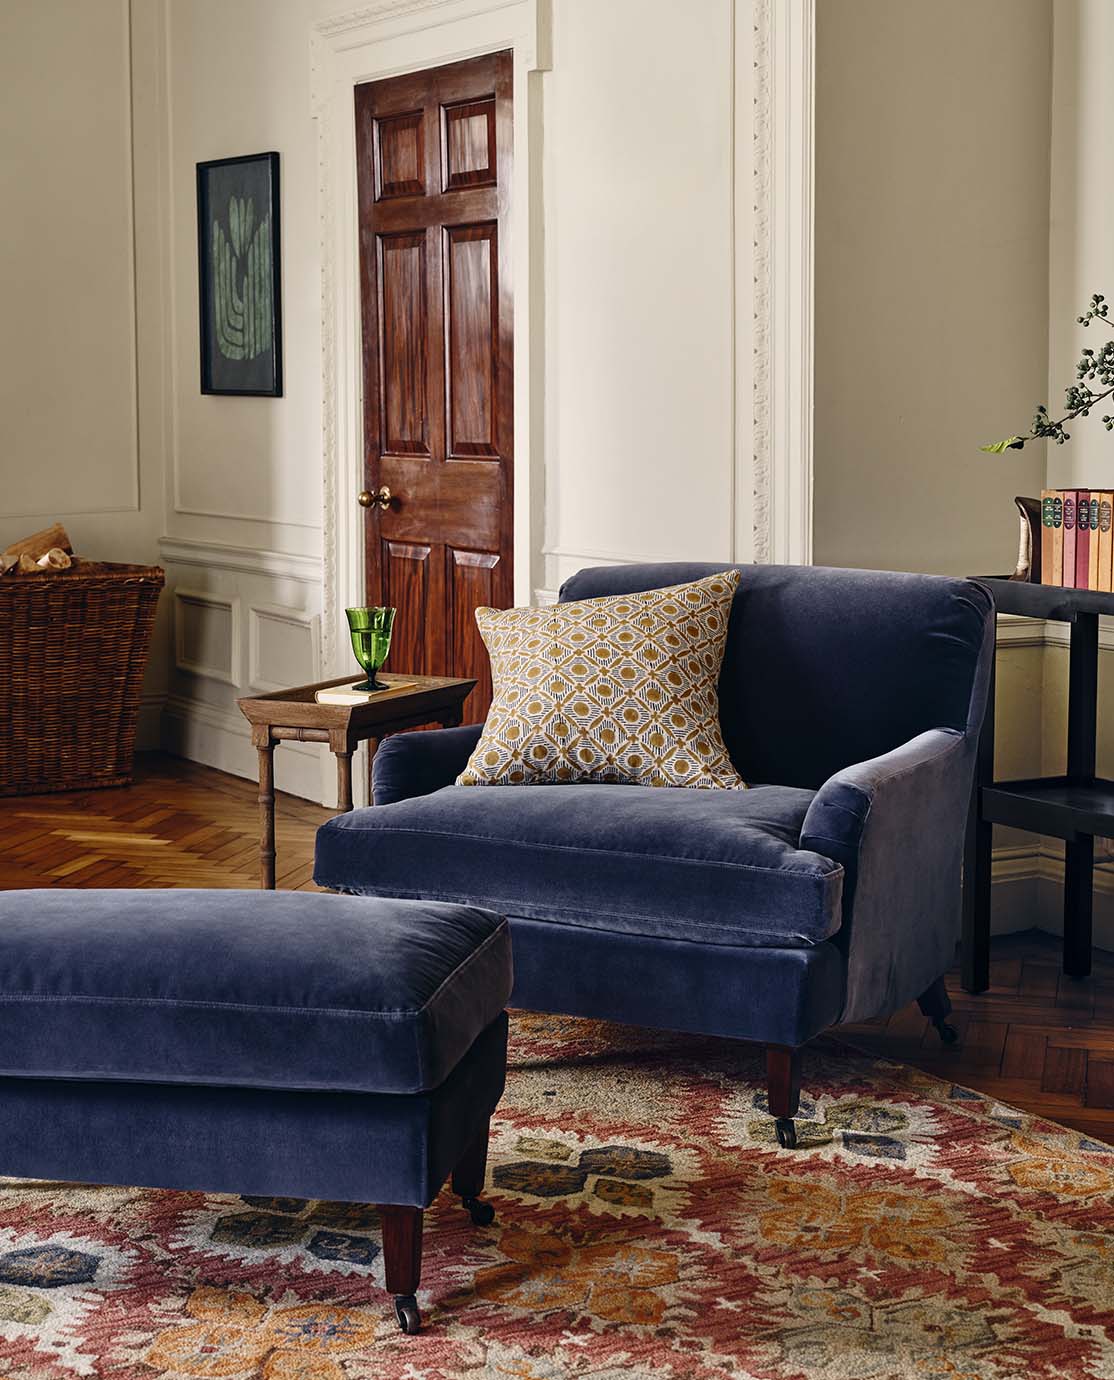 A sitting room featuring a blue velvet armchair and a footstool with a patterened rug underneath. Behind is a wooden side-table and a dark wooden door.